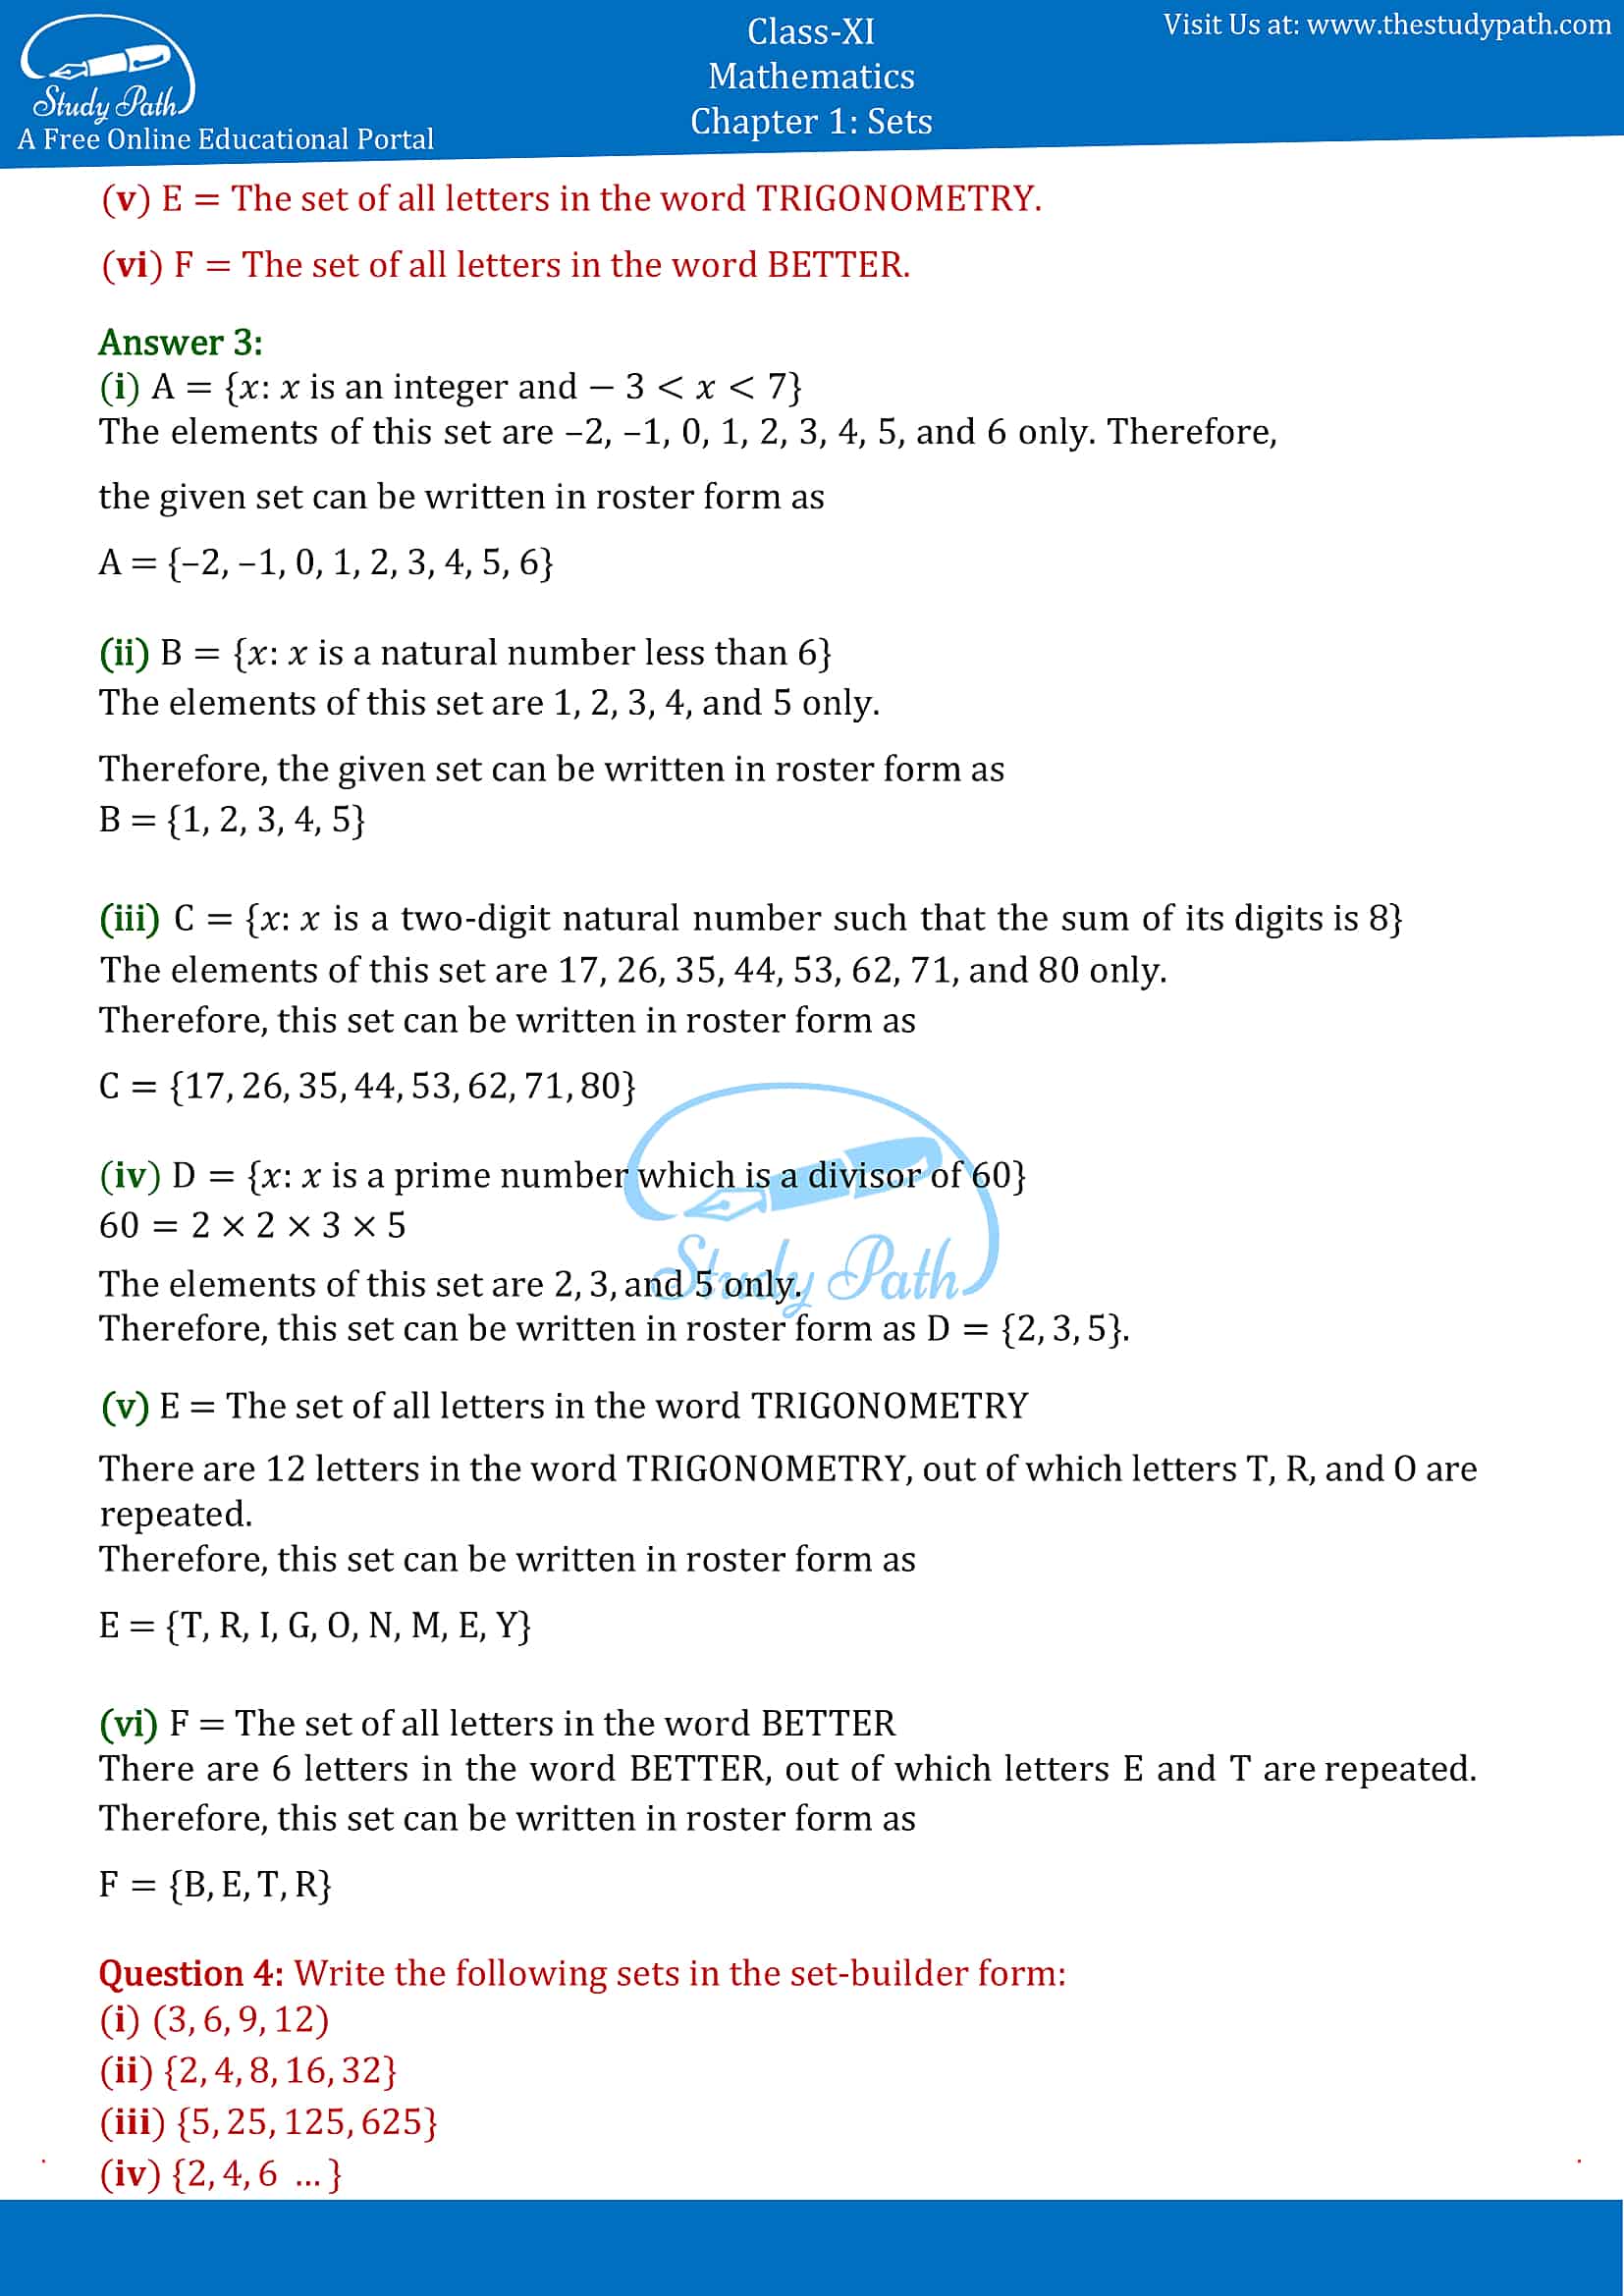 NCERT Solutions for Class 11 Maths chapter 1 sets Exercise 1.1